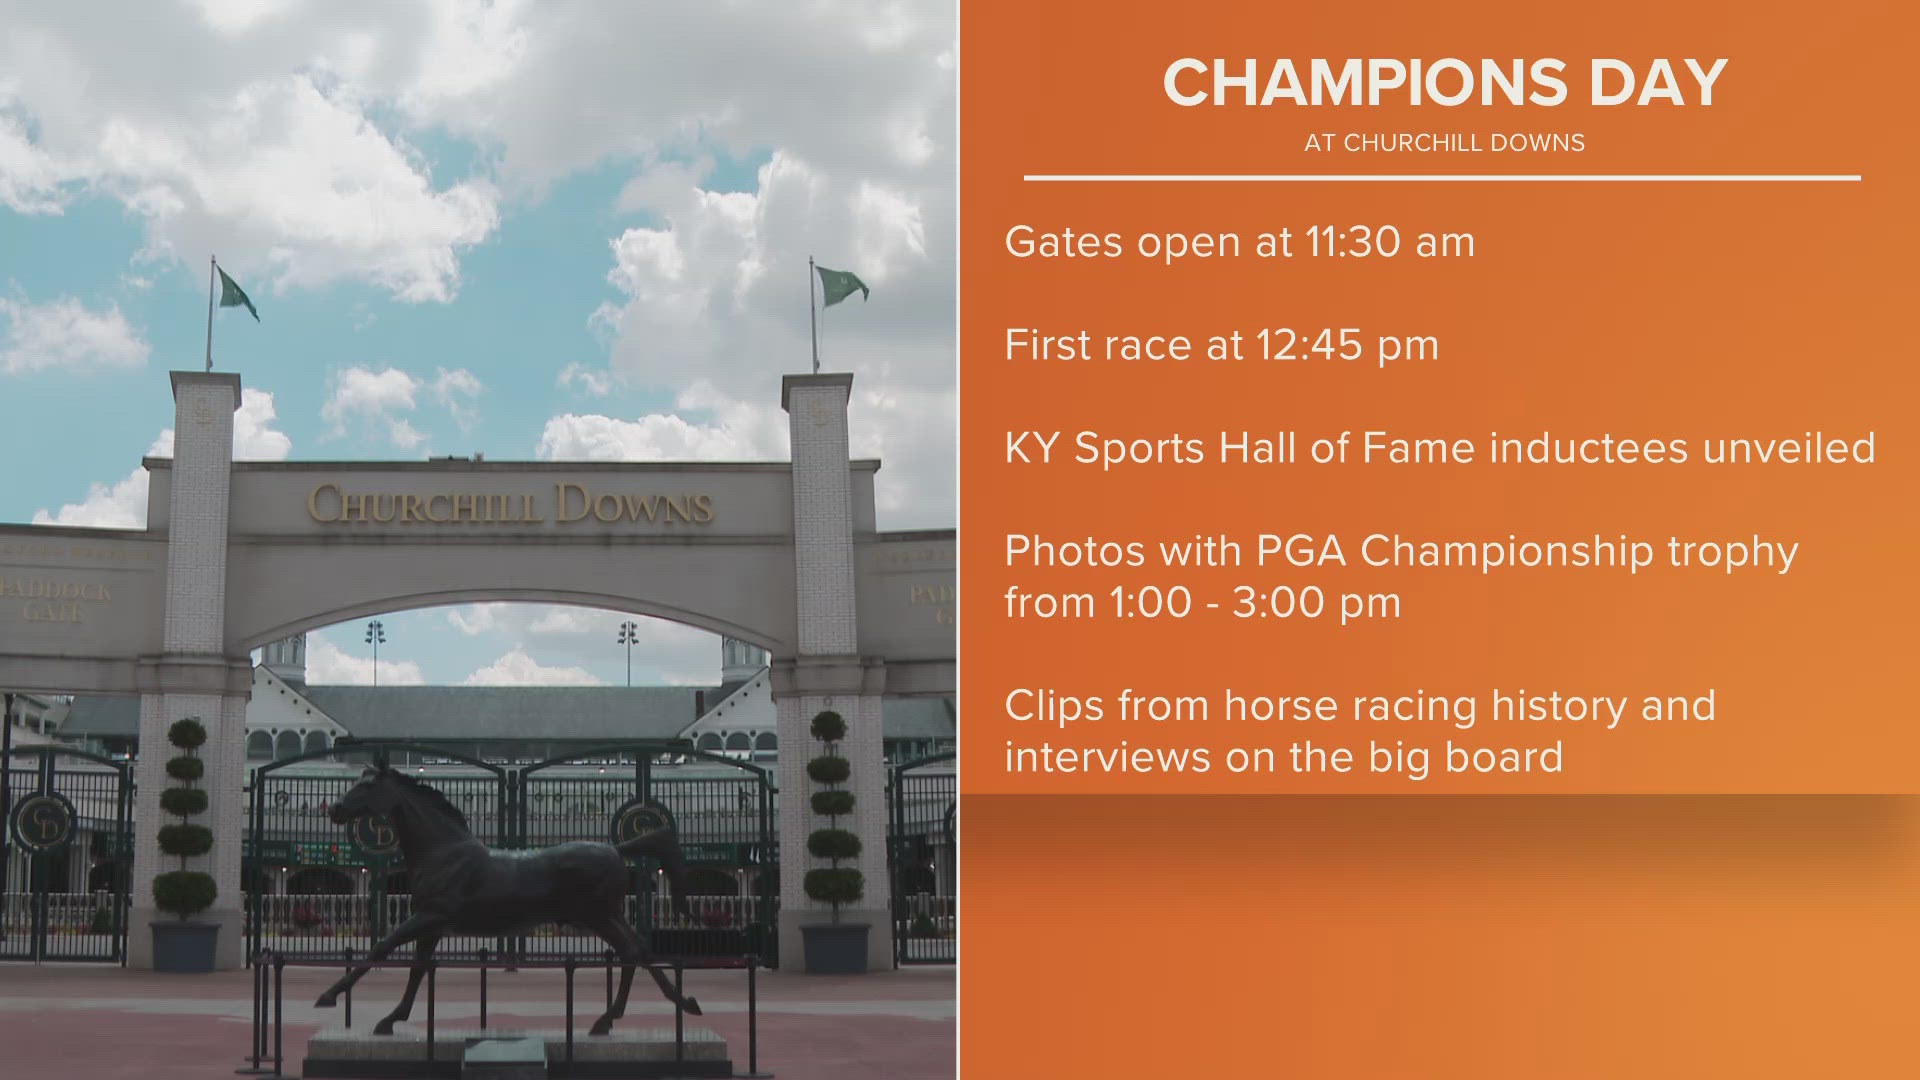 Gates open at 11:30 a.m. on Wednesday after the first race begins at 12:45 p.m.